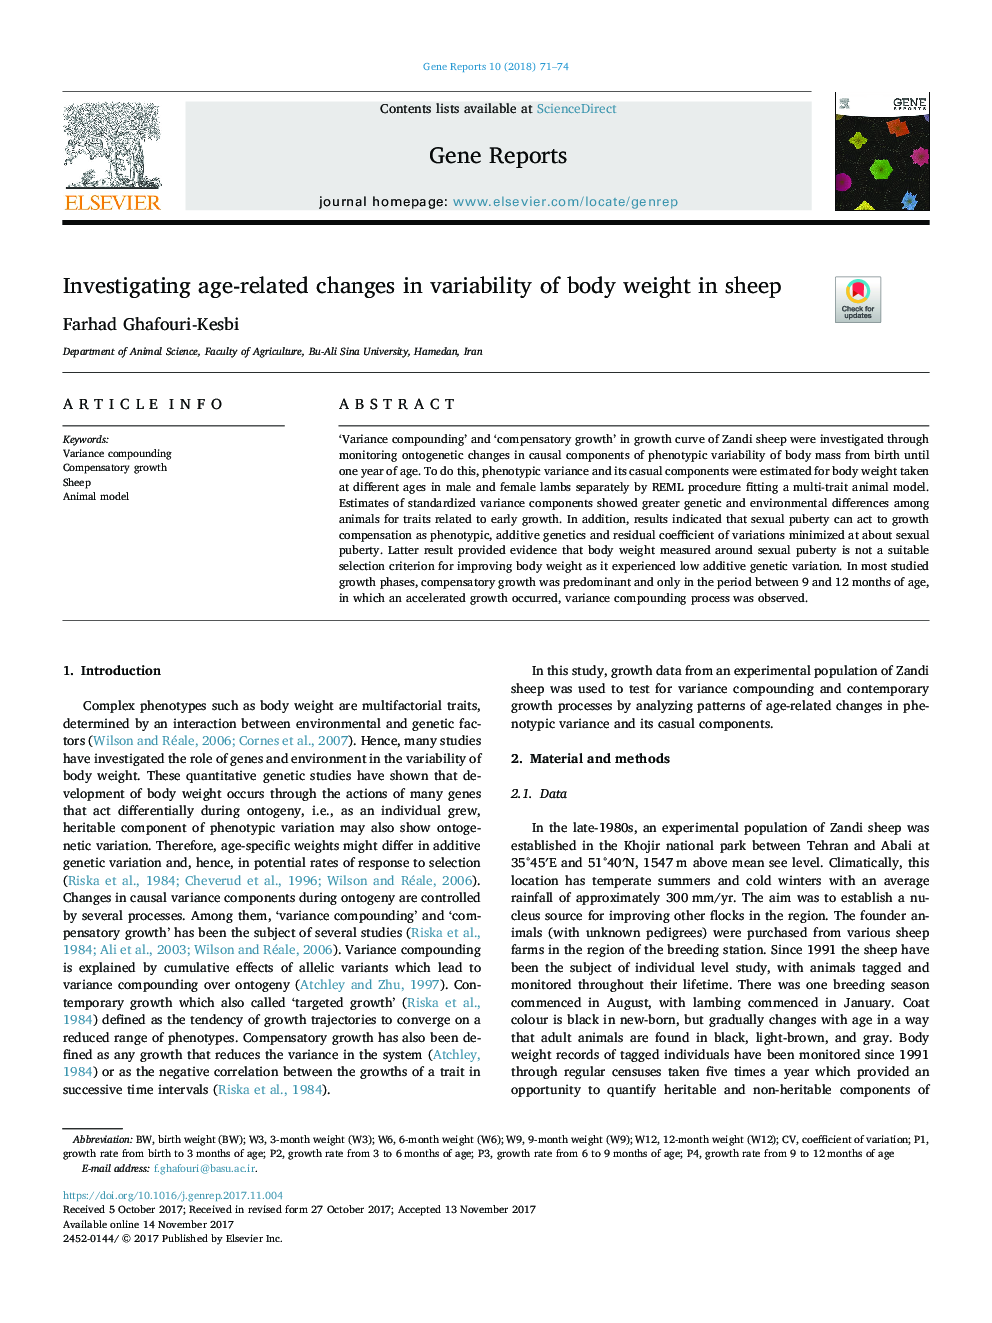 Investigating age-related changes in variability of body weight in sheep